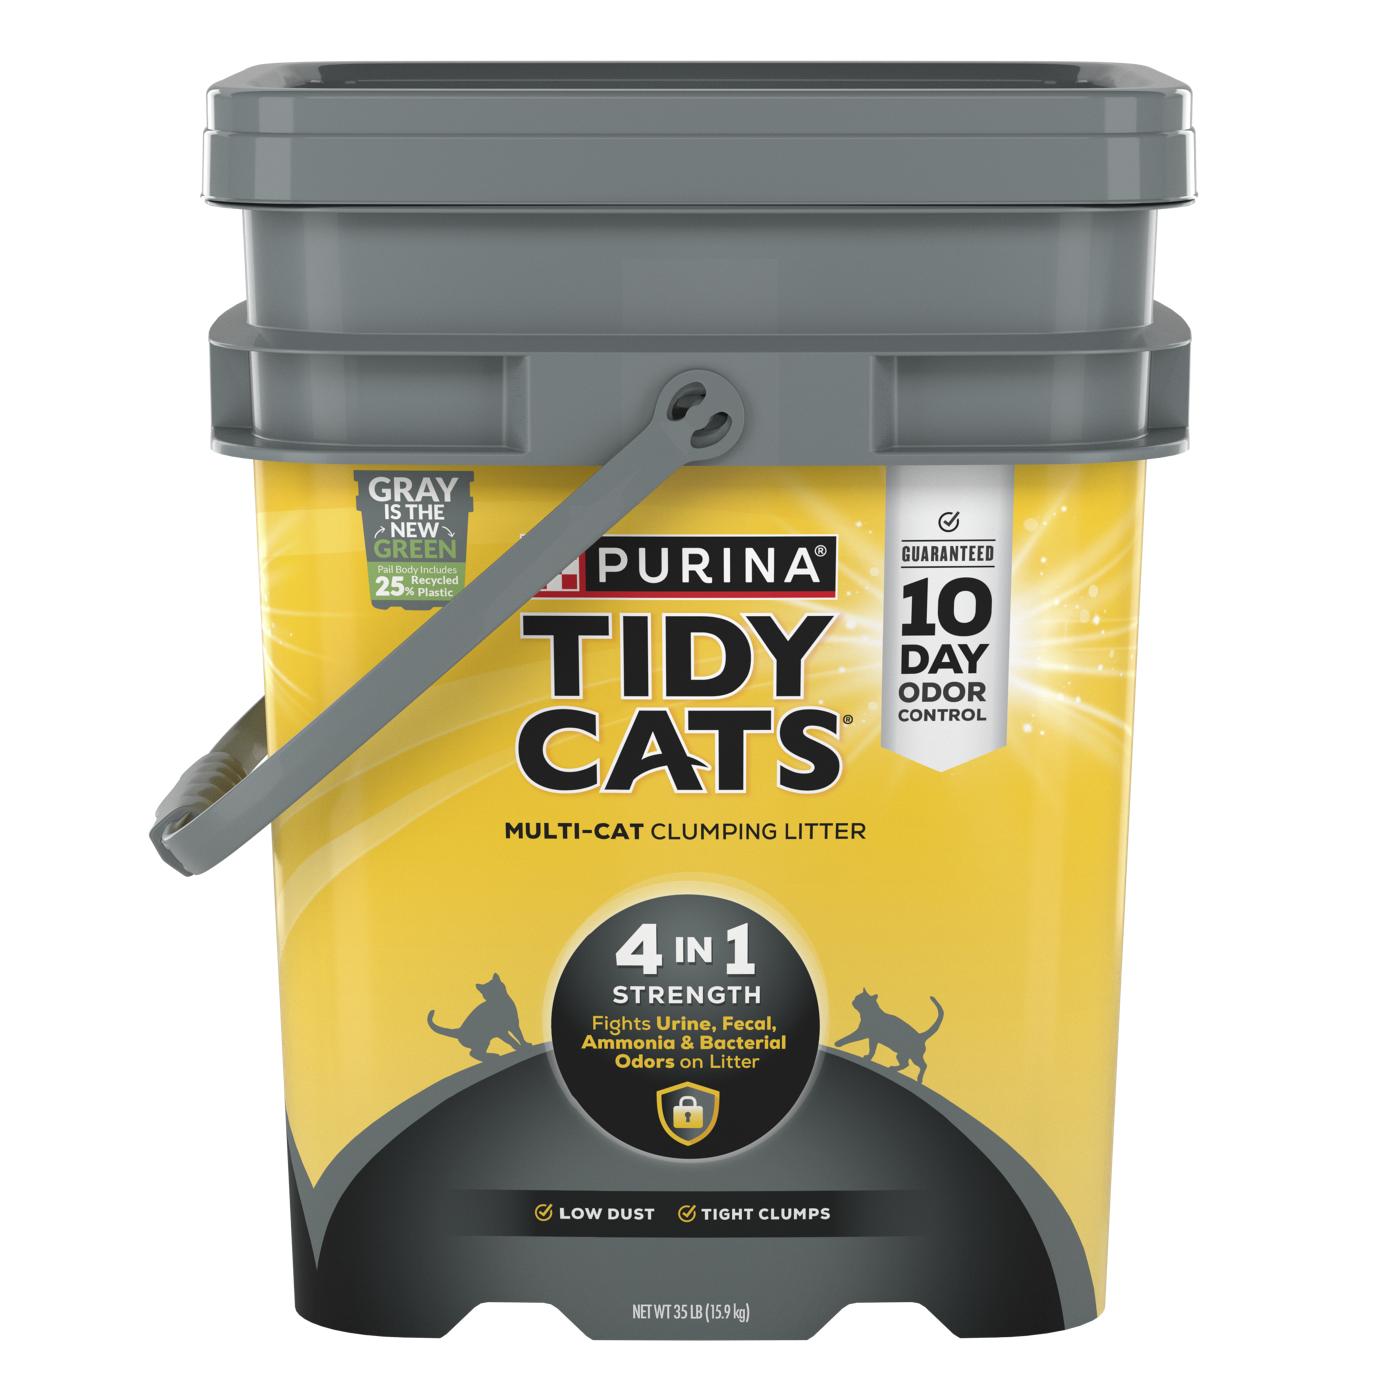 Tidy Cats Purina Tidy Cats Clumping Cat Litter, 4-in-1 Strength Multi Cat Litter; image 1 of 6